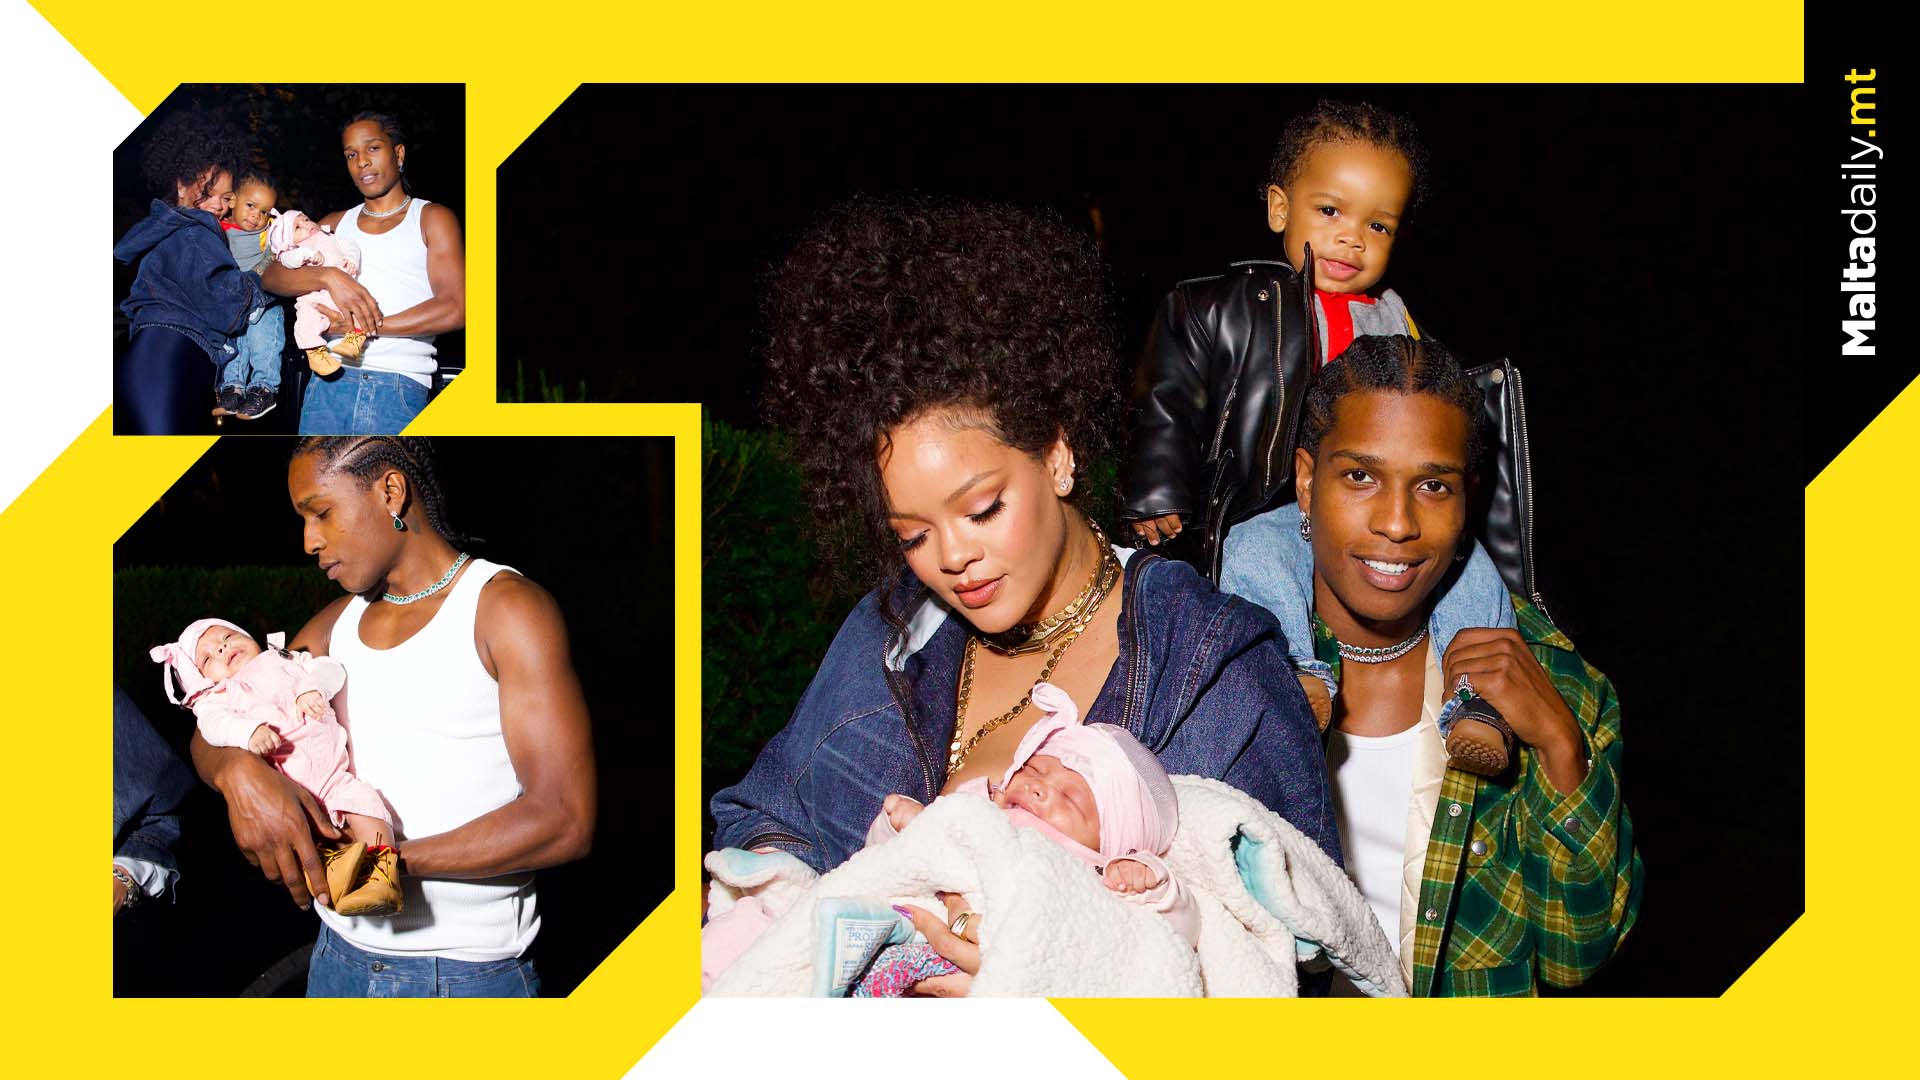 Rihanna And A$AP Rocky Share New Images As Family Of 4